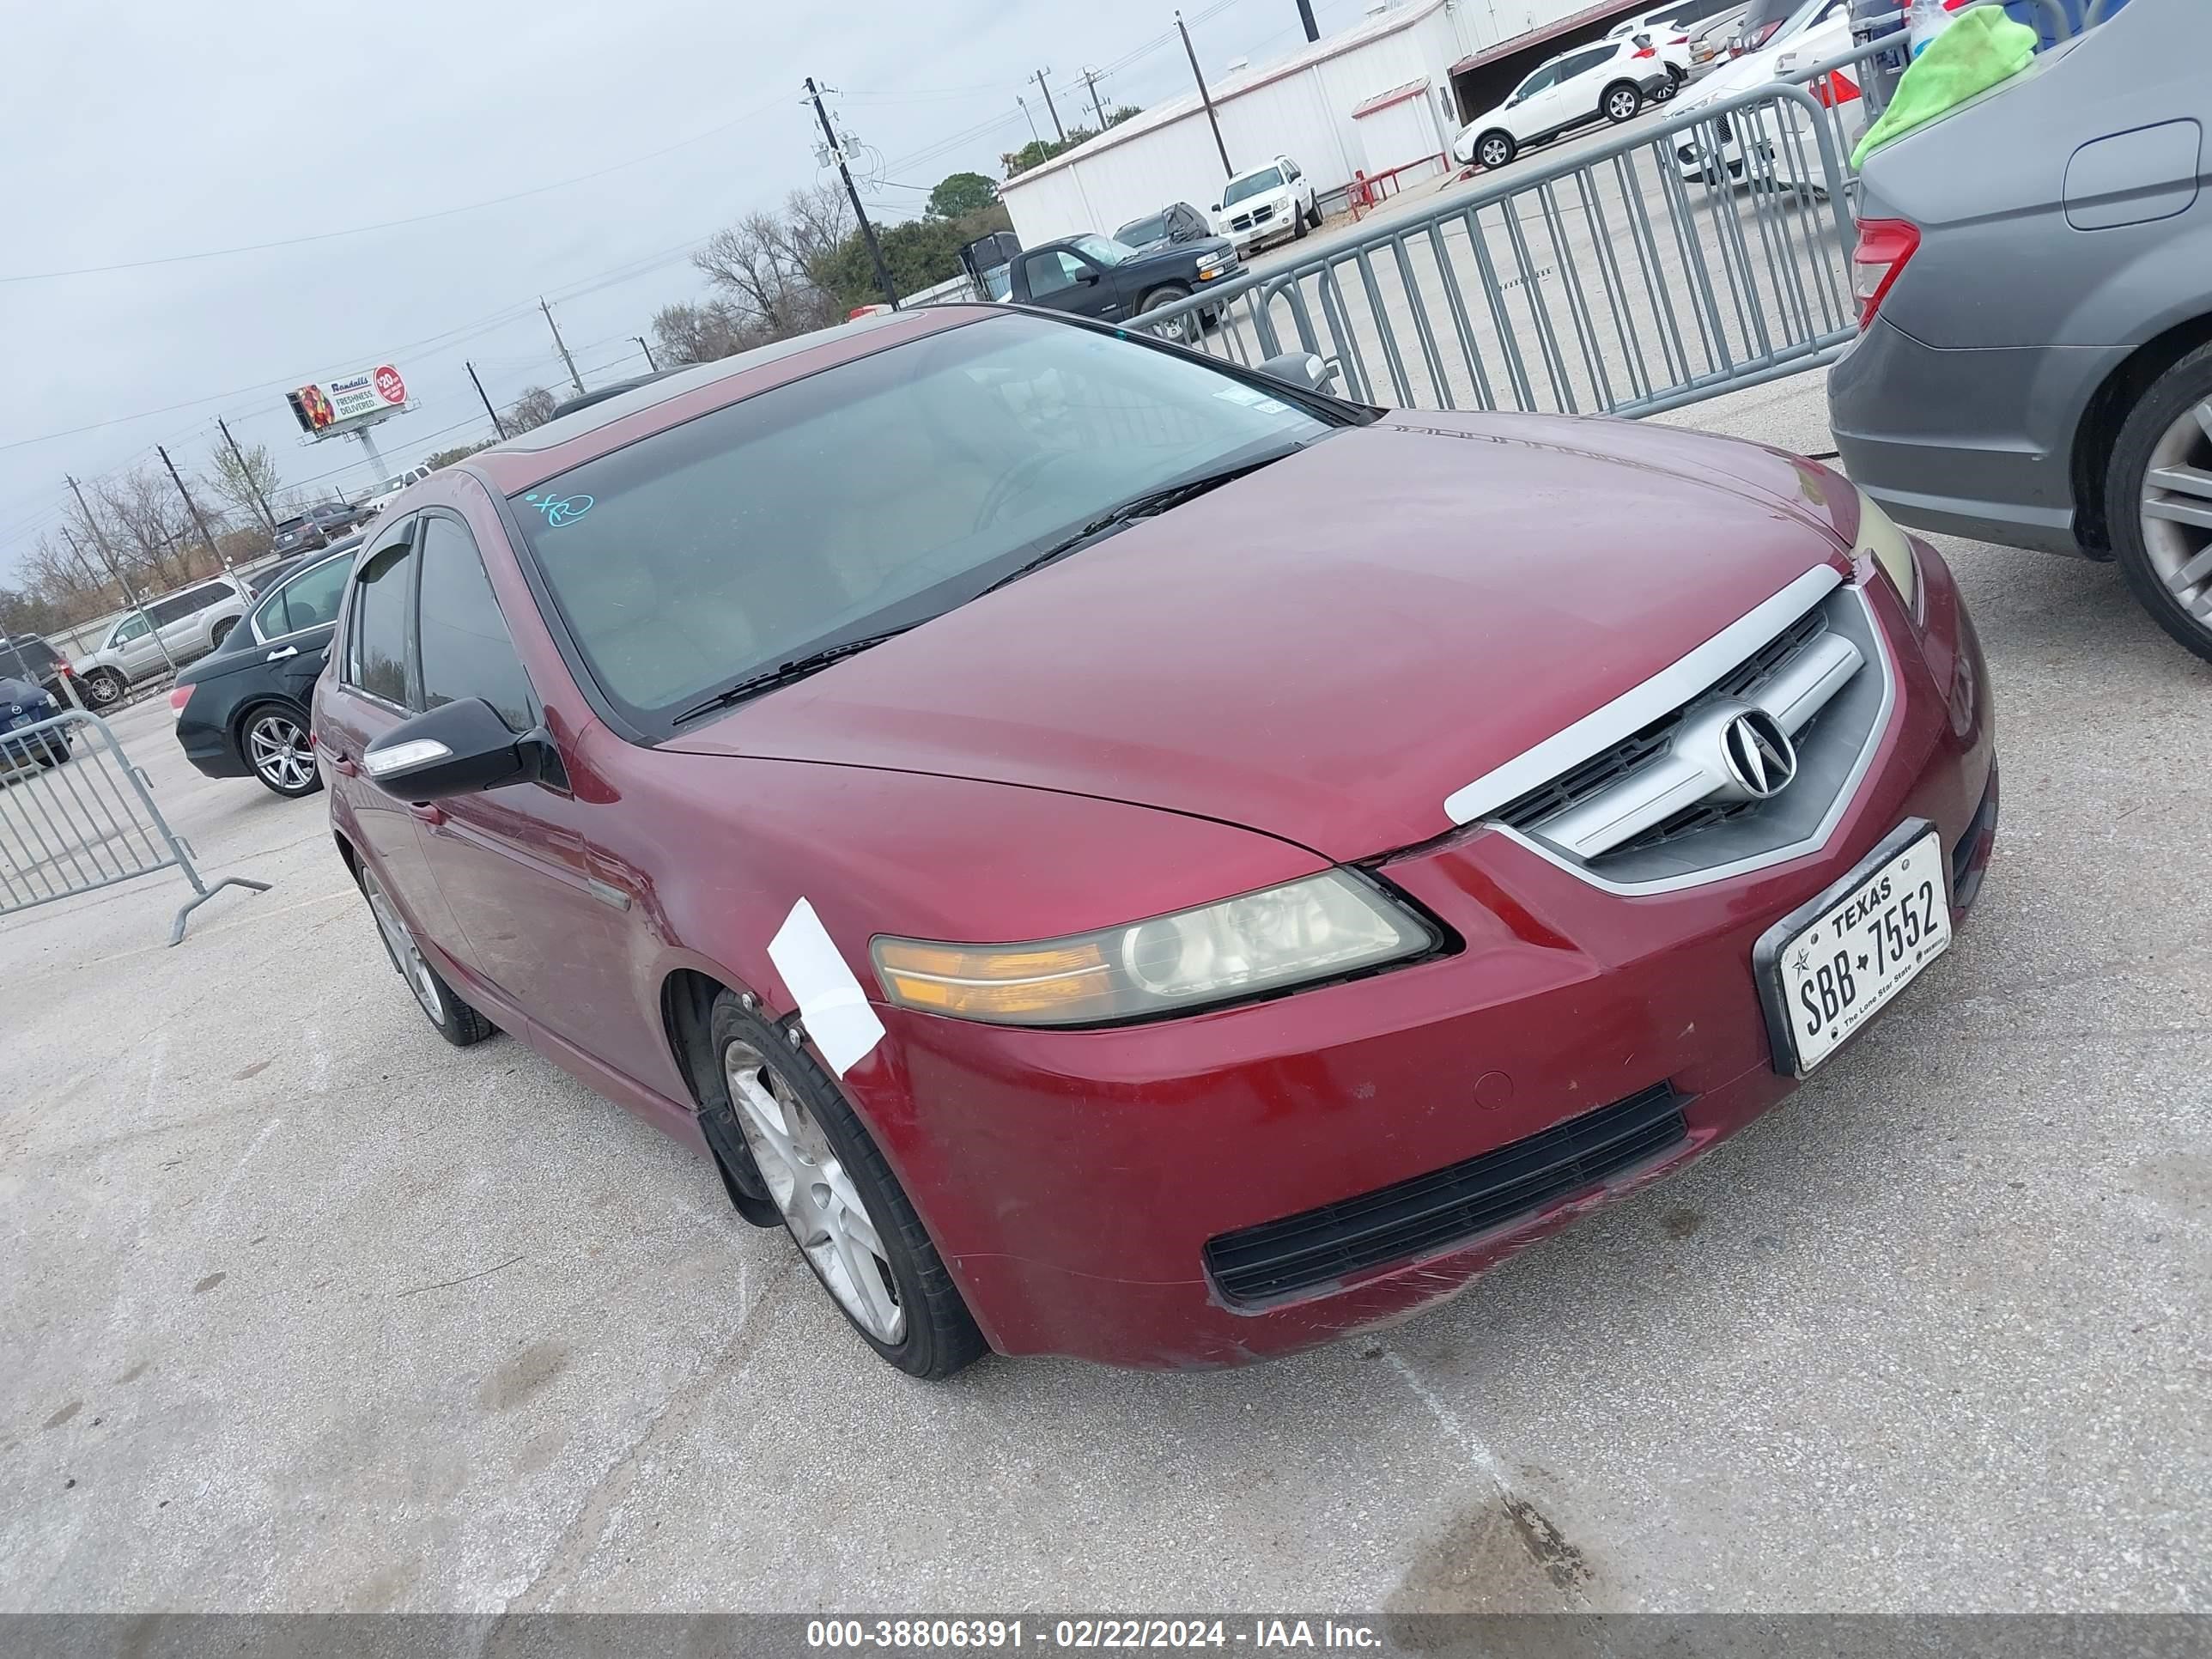 vin: 19UUA66236A067643 19UUA66236A067643 2006 acura tl 3200 for Sale in 77038, 2535 West Mt. Houston Road, Houston, USA